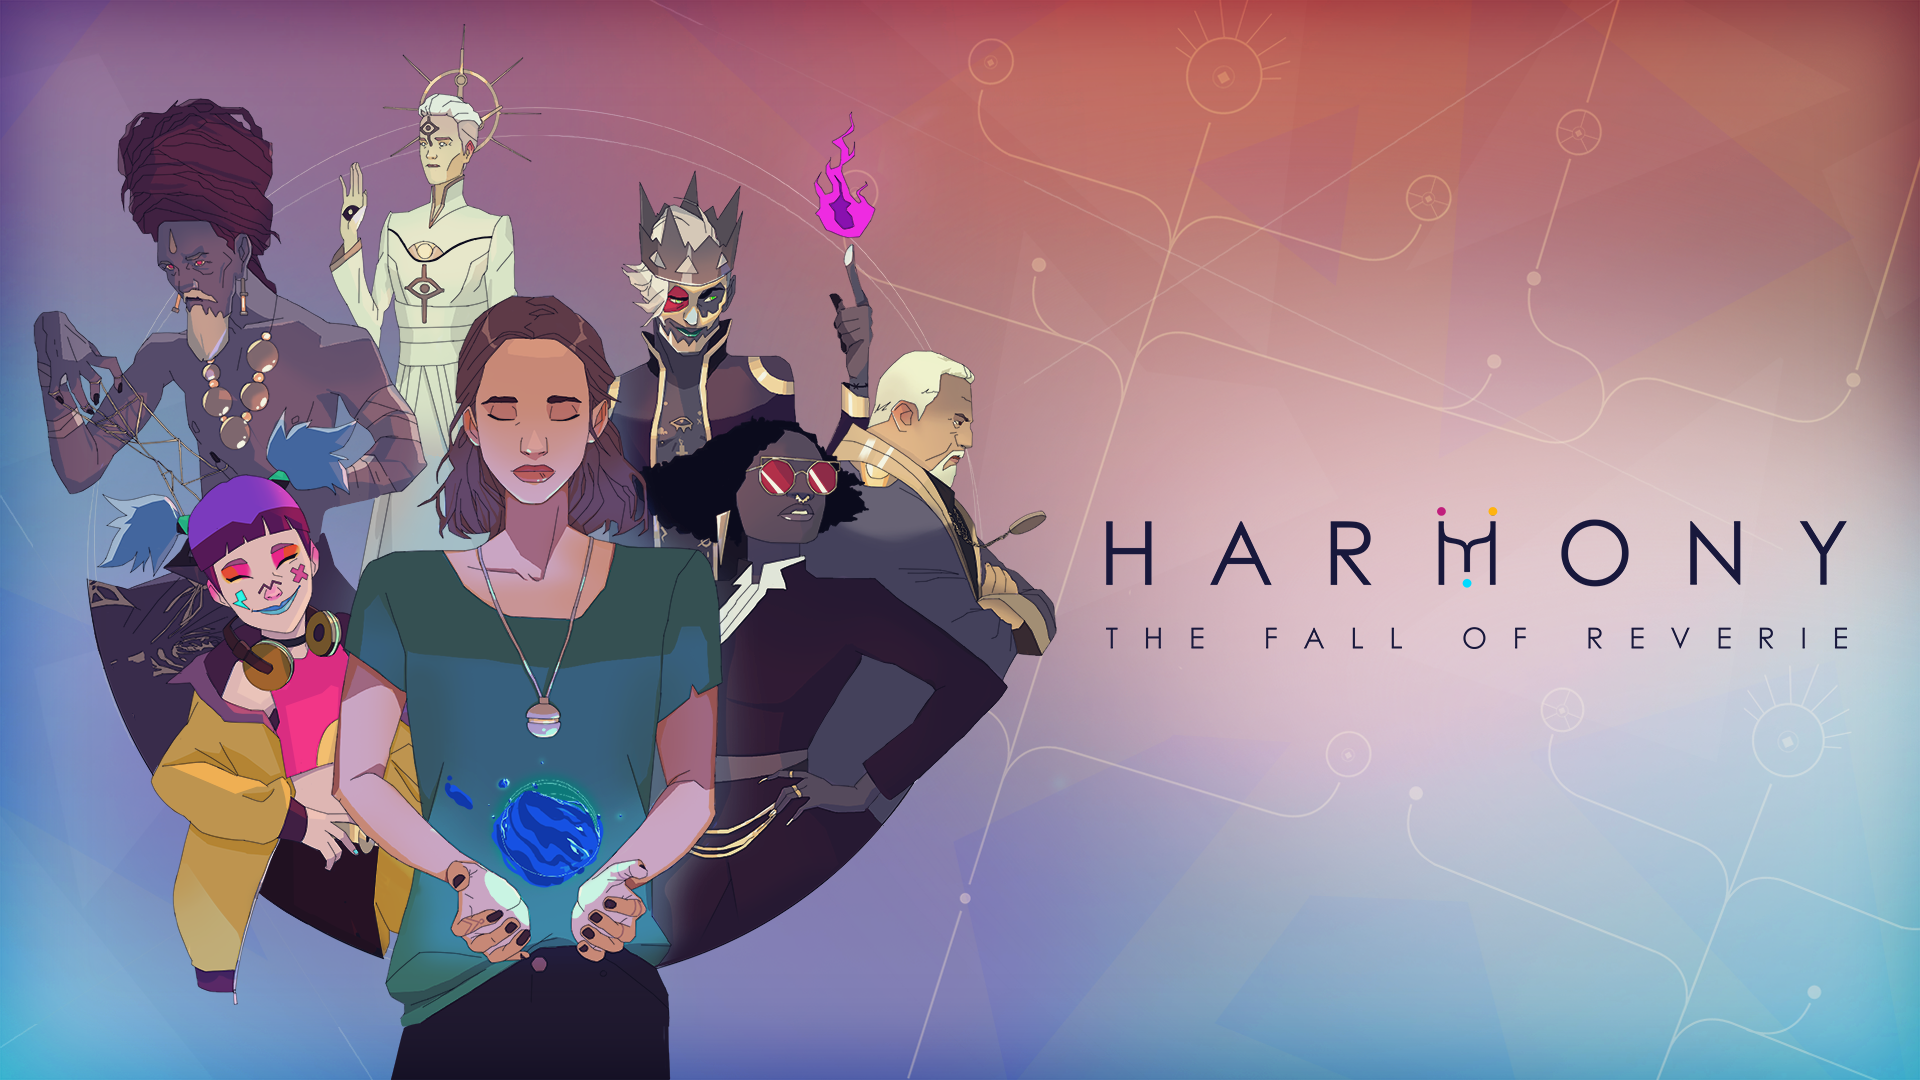 The key art for Harmony: The Fall of Reverie.